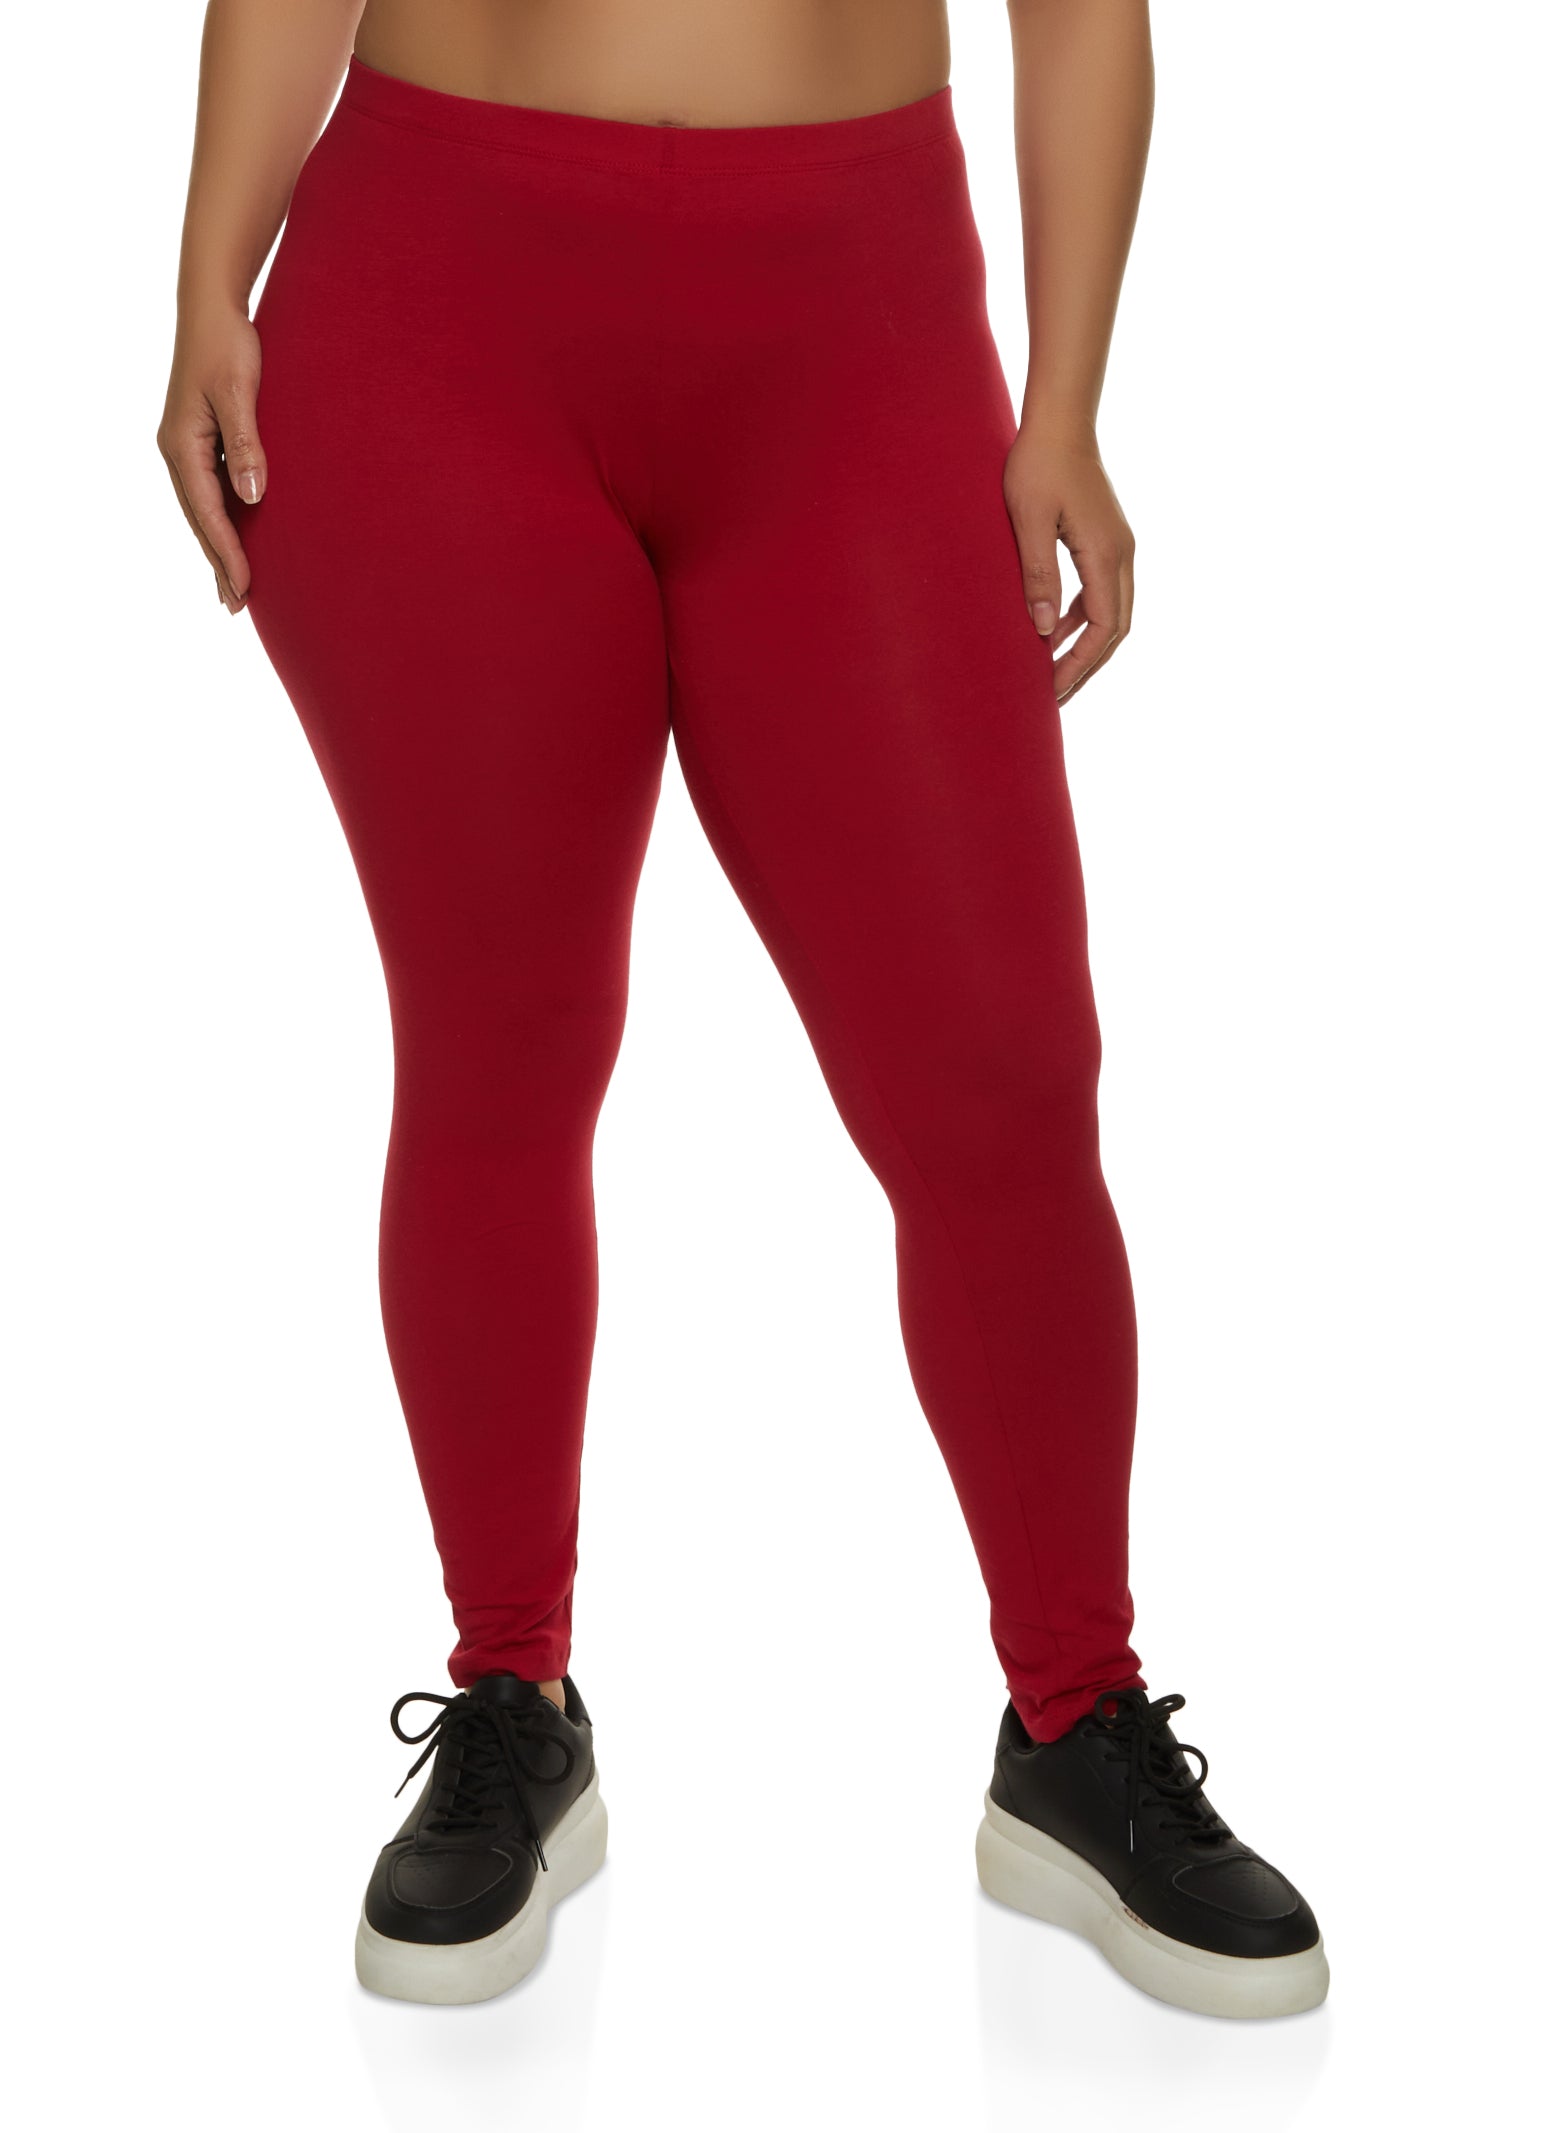 Leggings,Candy Colors Solid Leggings Women Casual Plus Size Multicolor  Shiny Glossy Legging Female Elastic Pant : : Clothing, Shoes &  Accessories